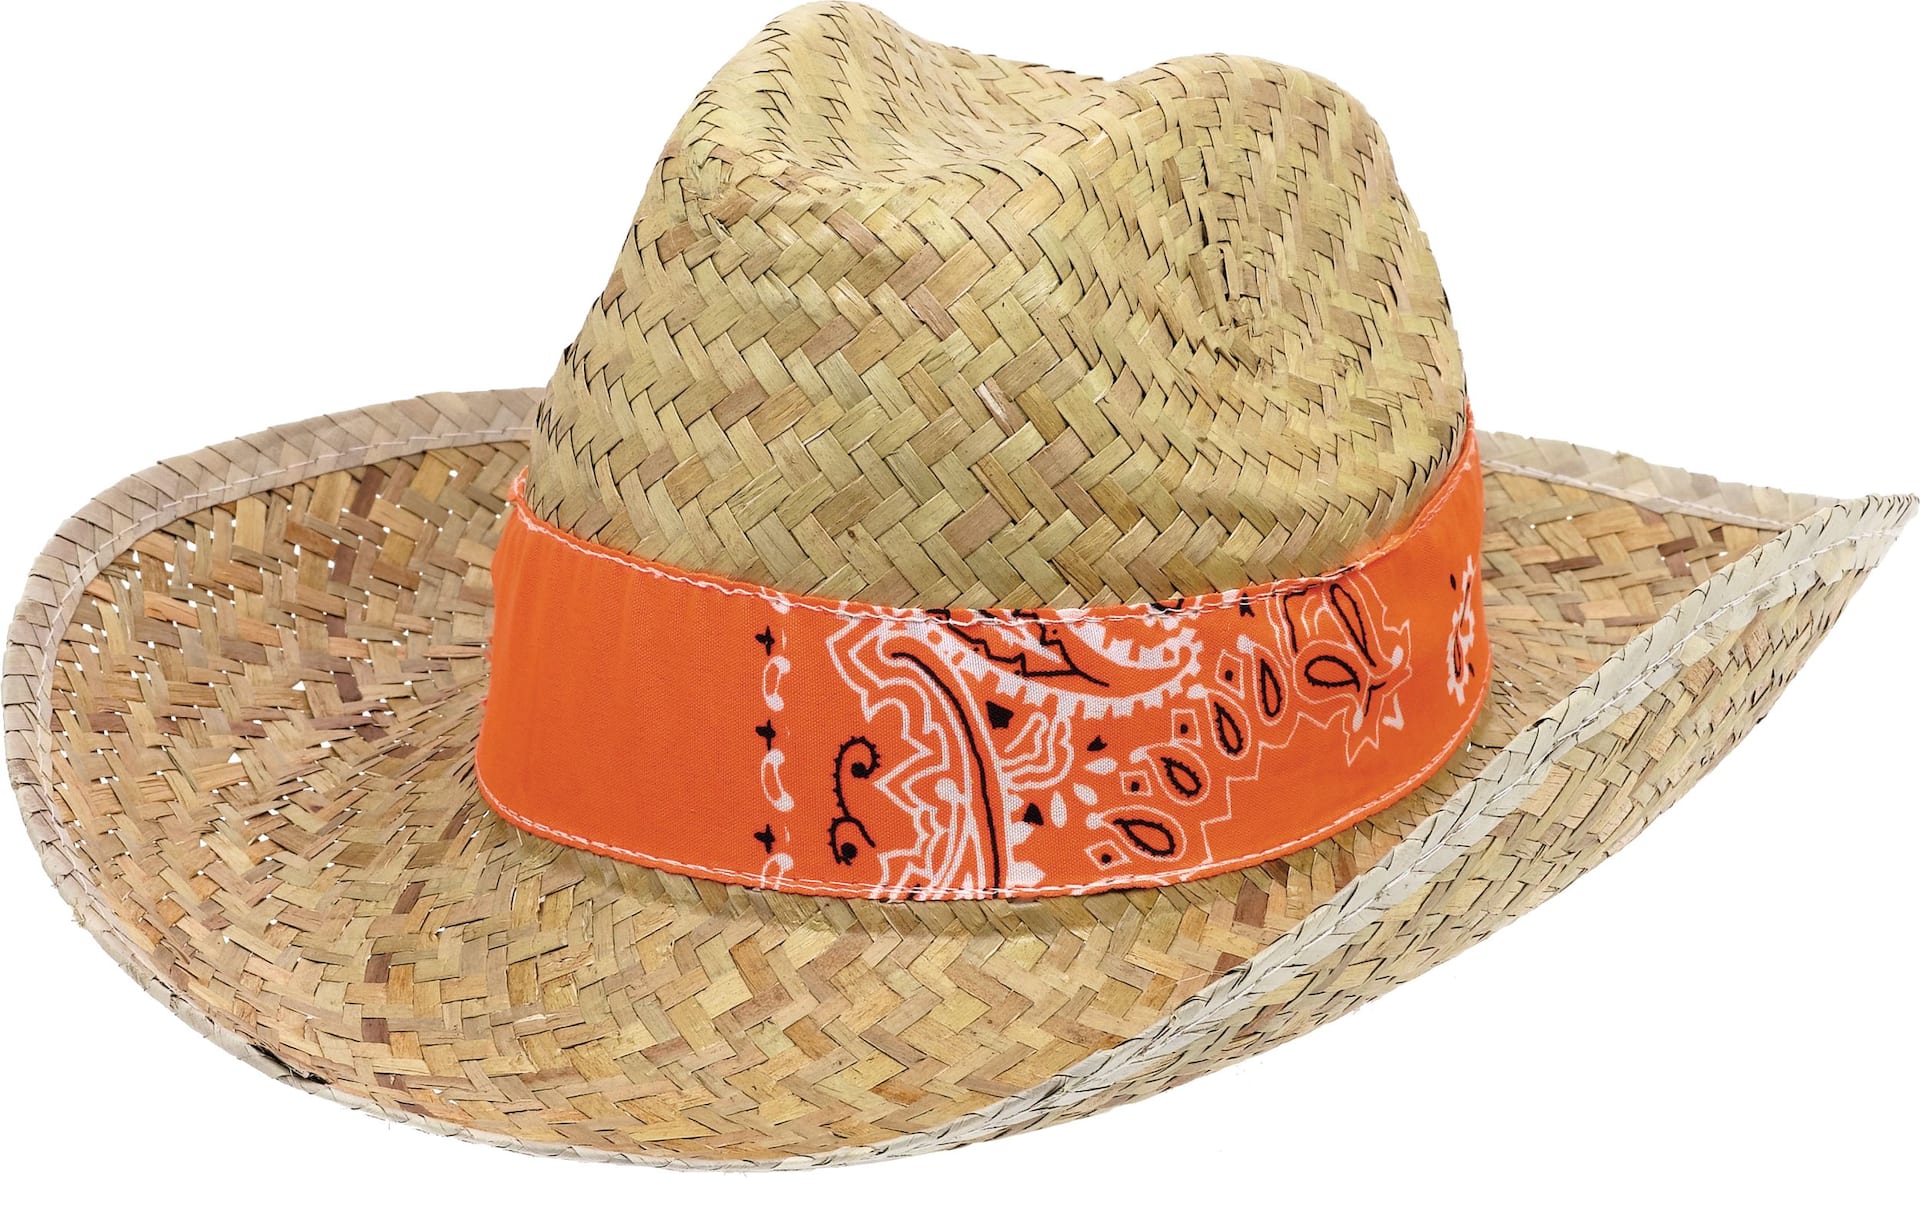 Western Cowboy Straw Hat with Bandana, Pink/Orange Assorted Colours, One  Size, Wearable Costume Accessory for Halloween